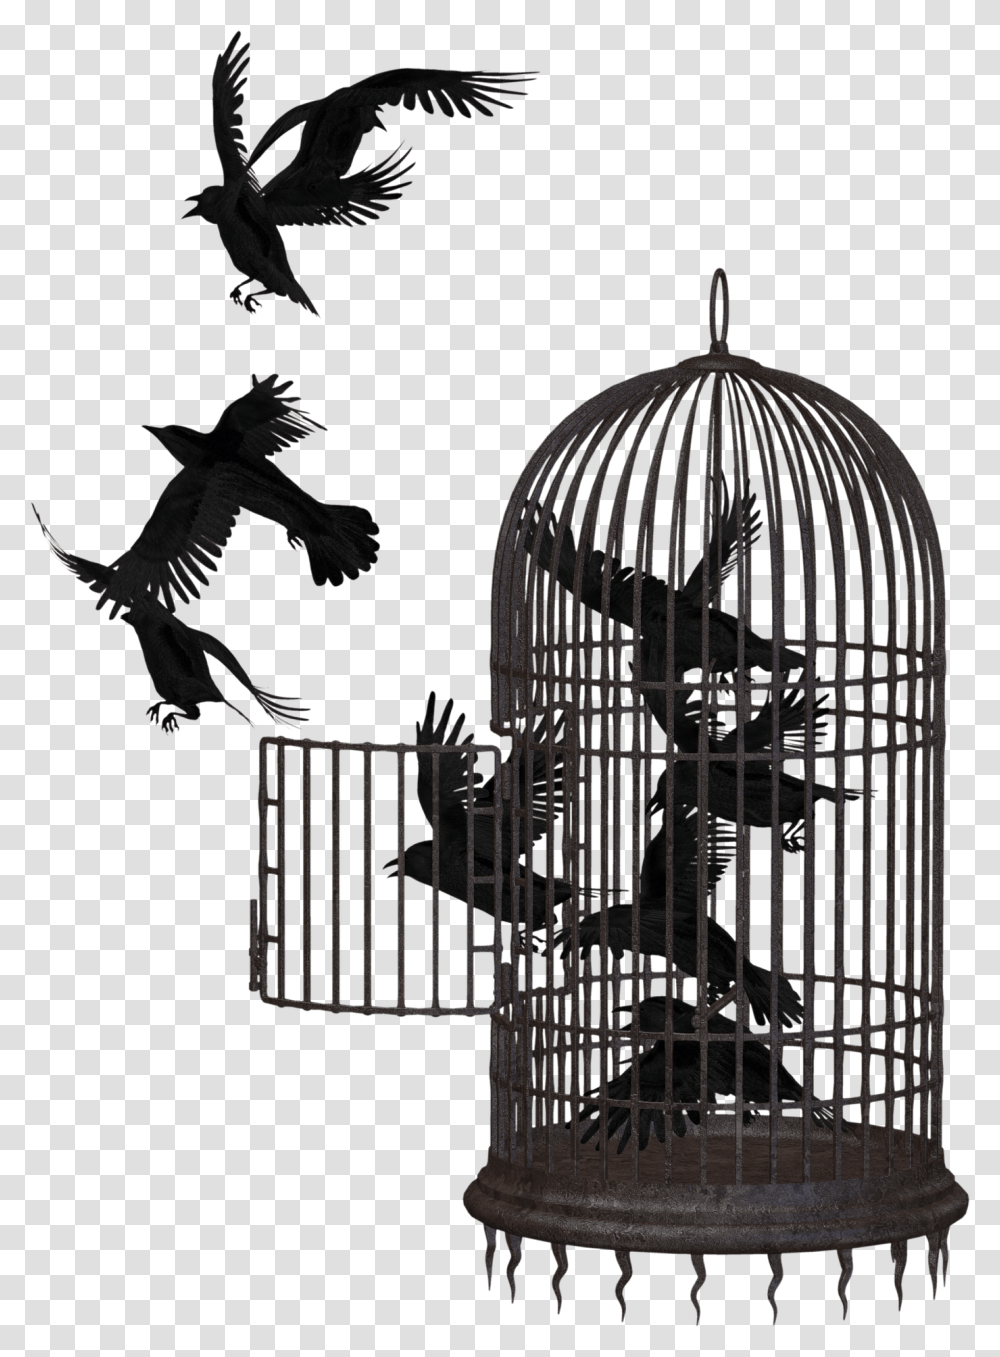 Birds In A Cage, Animal, Blackbird, Flying, Gate Transparent Png